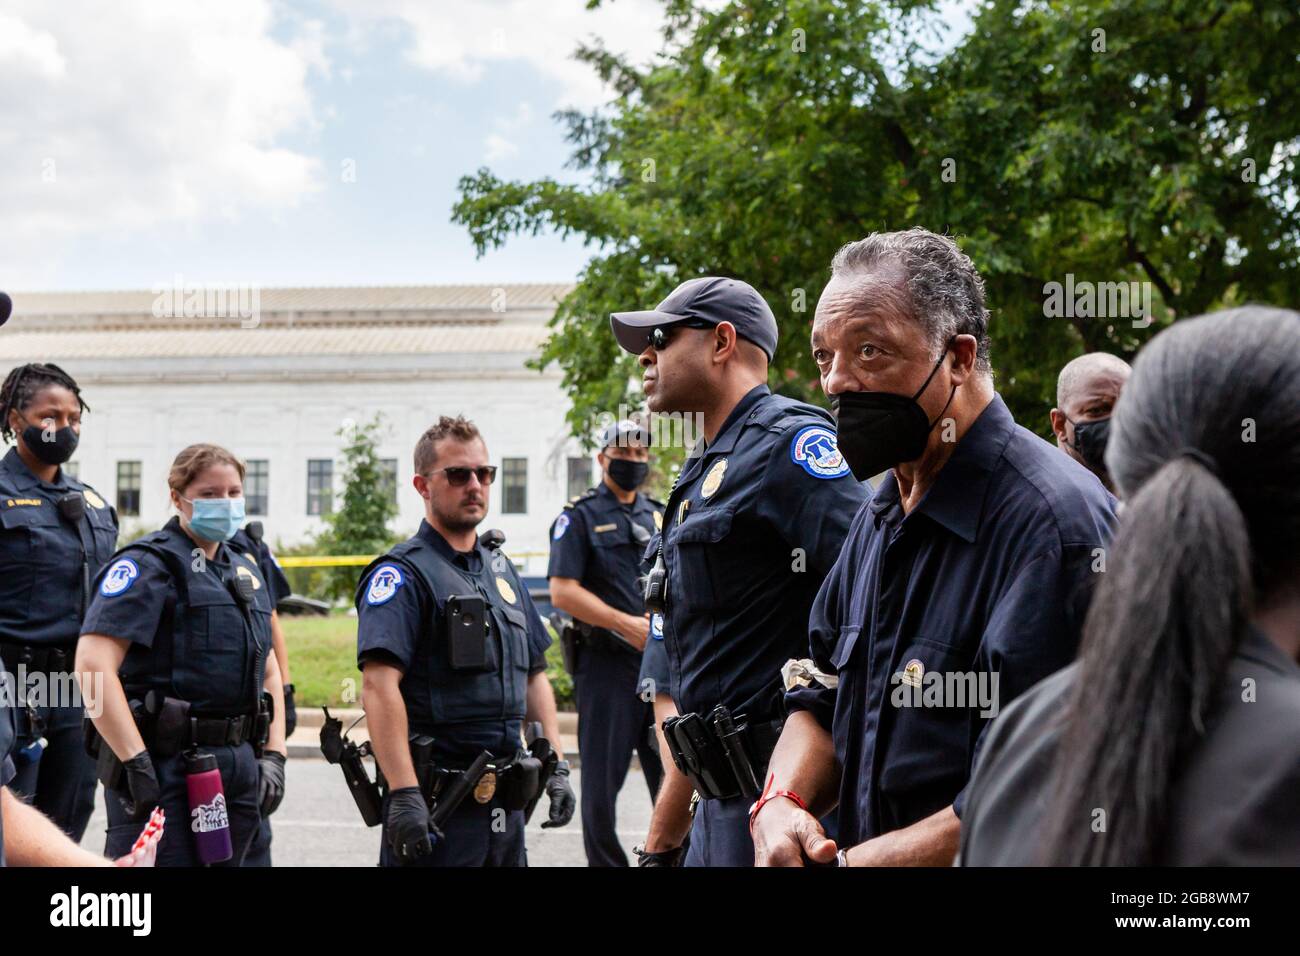 Washington, DC, USA, 2 August 2021.  Pictured: Rev. Jesse Jackson is arrested by Capitol Police while participating in a civil disobedience action during the Moral Monday March.  Protesters blocked the street in front of the Hart Senate Building, leading to the arrest of hundreds.  The march was sponsored by the Poor People’s Campaign, Kairos Center, and Repairers of the Breach.  Credit: Allison Bailey / Alamy Live News Stock Photo